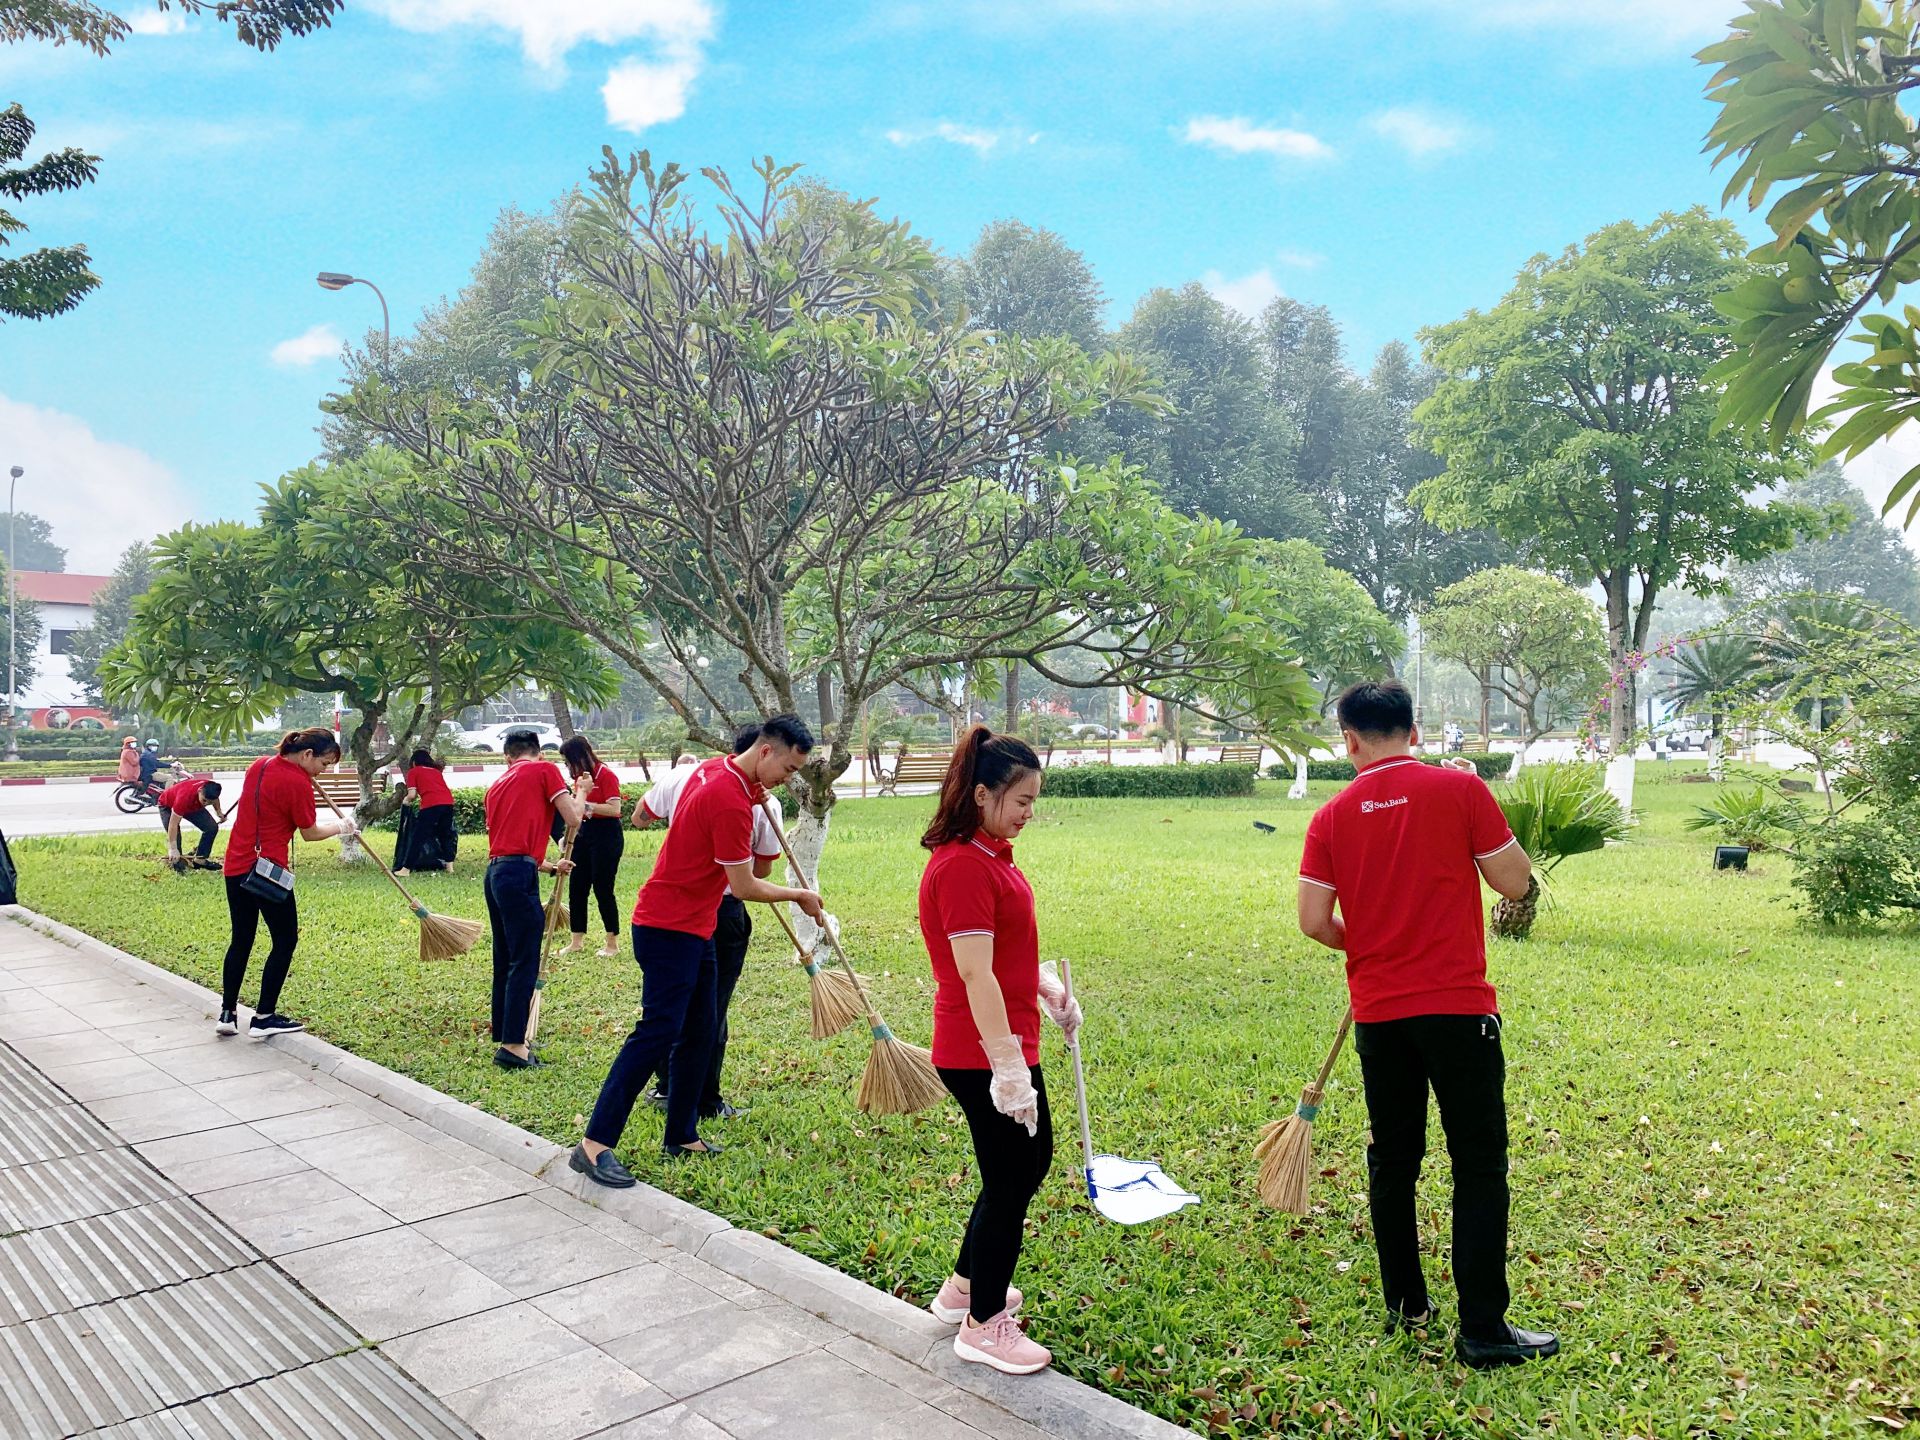 seabank launched citizens week 2019 with meaningful green activities